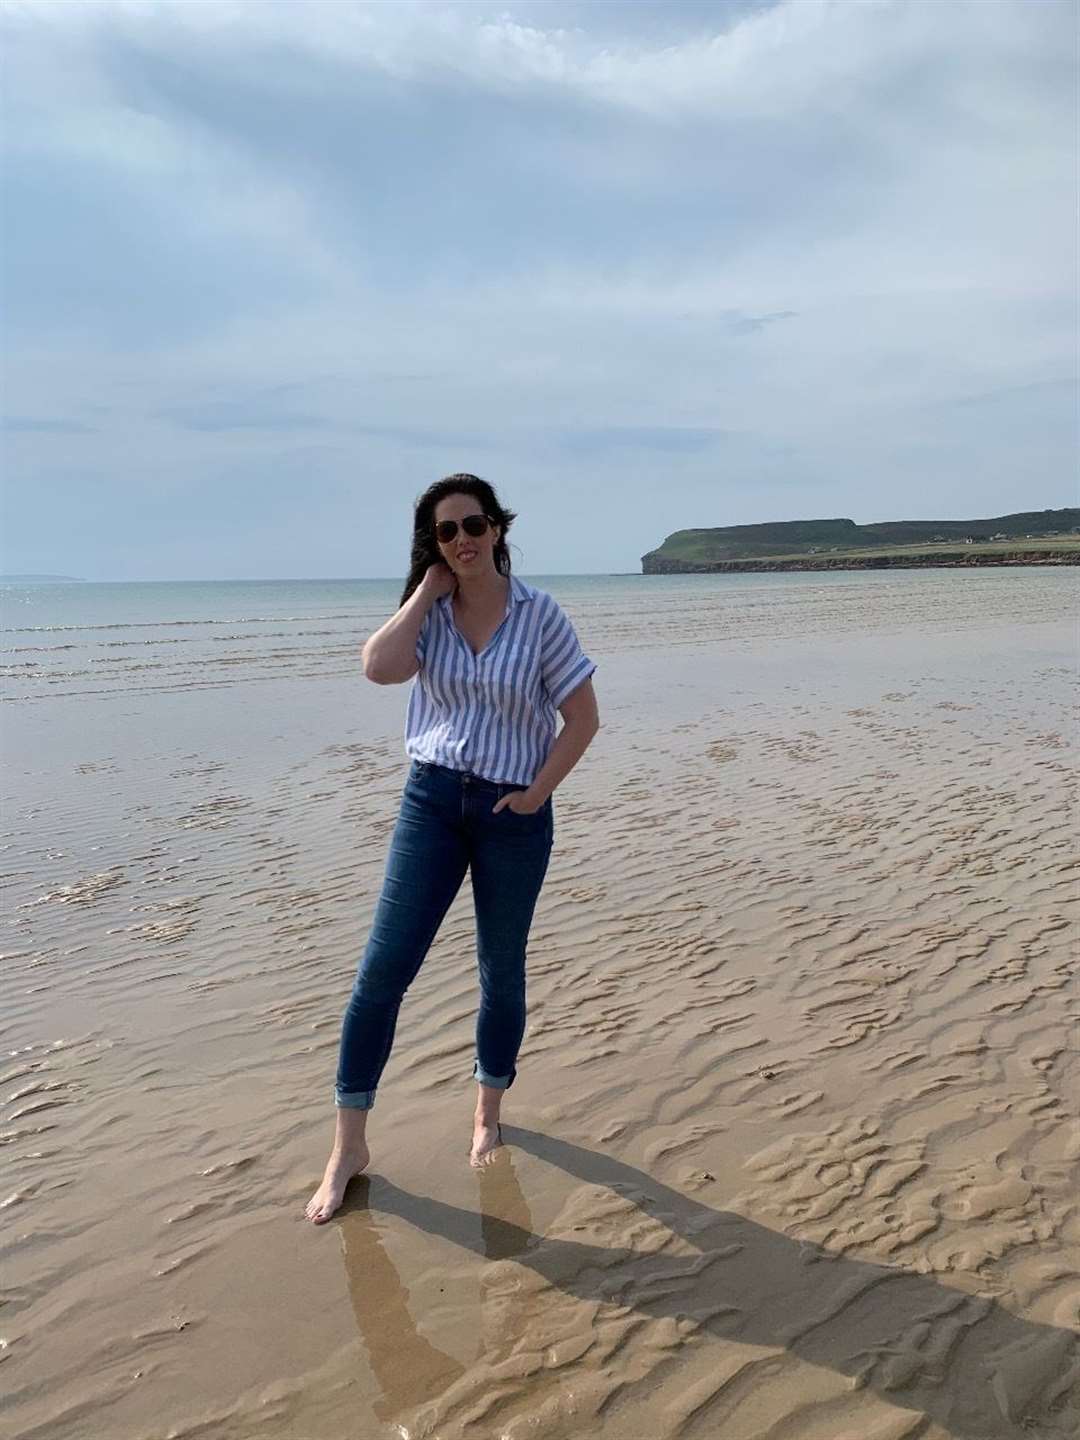 Brittany Brodie enjoys a sunny visit to Dunnet beach.